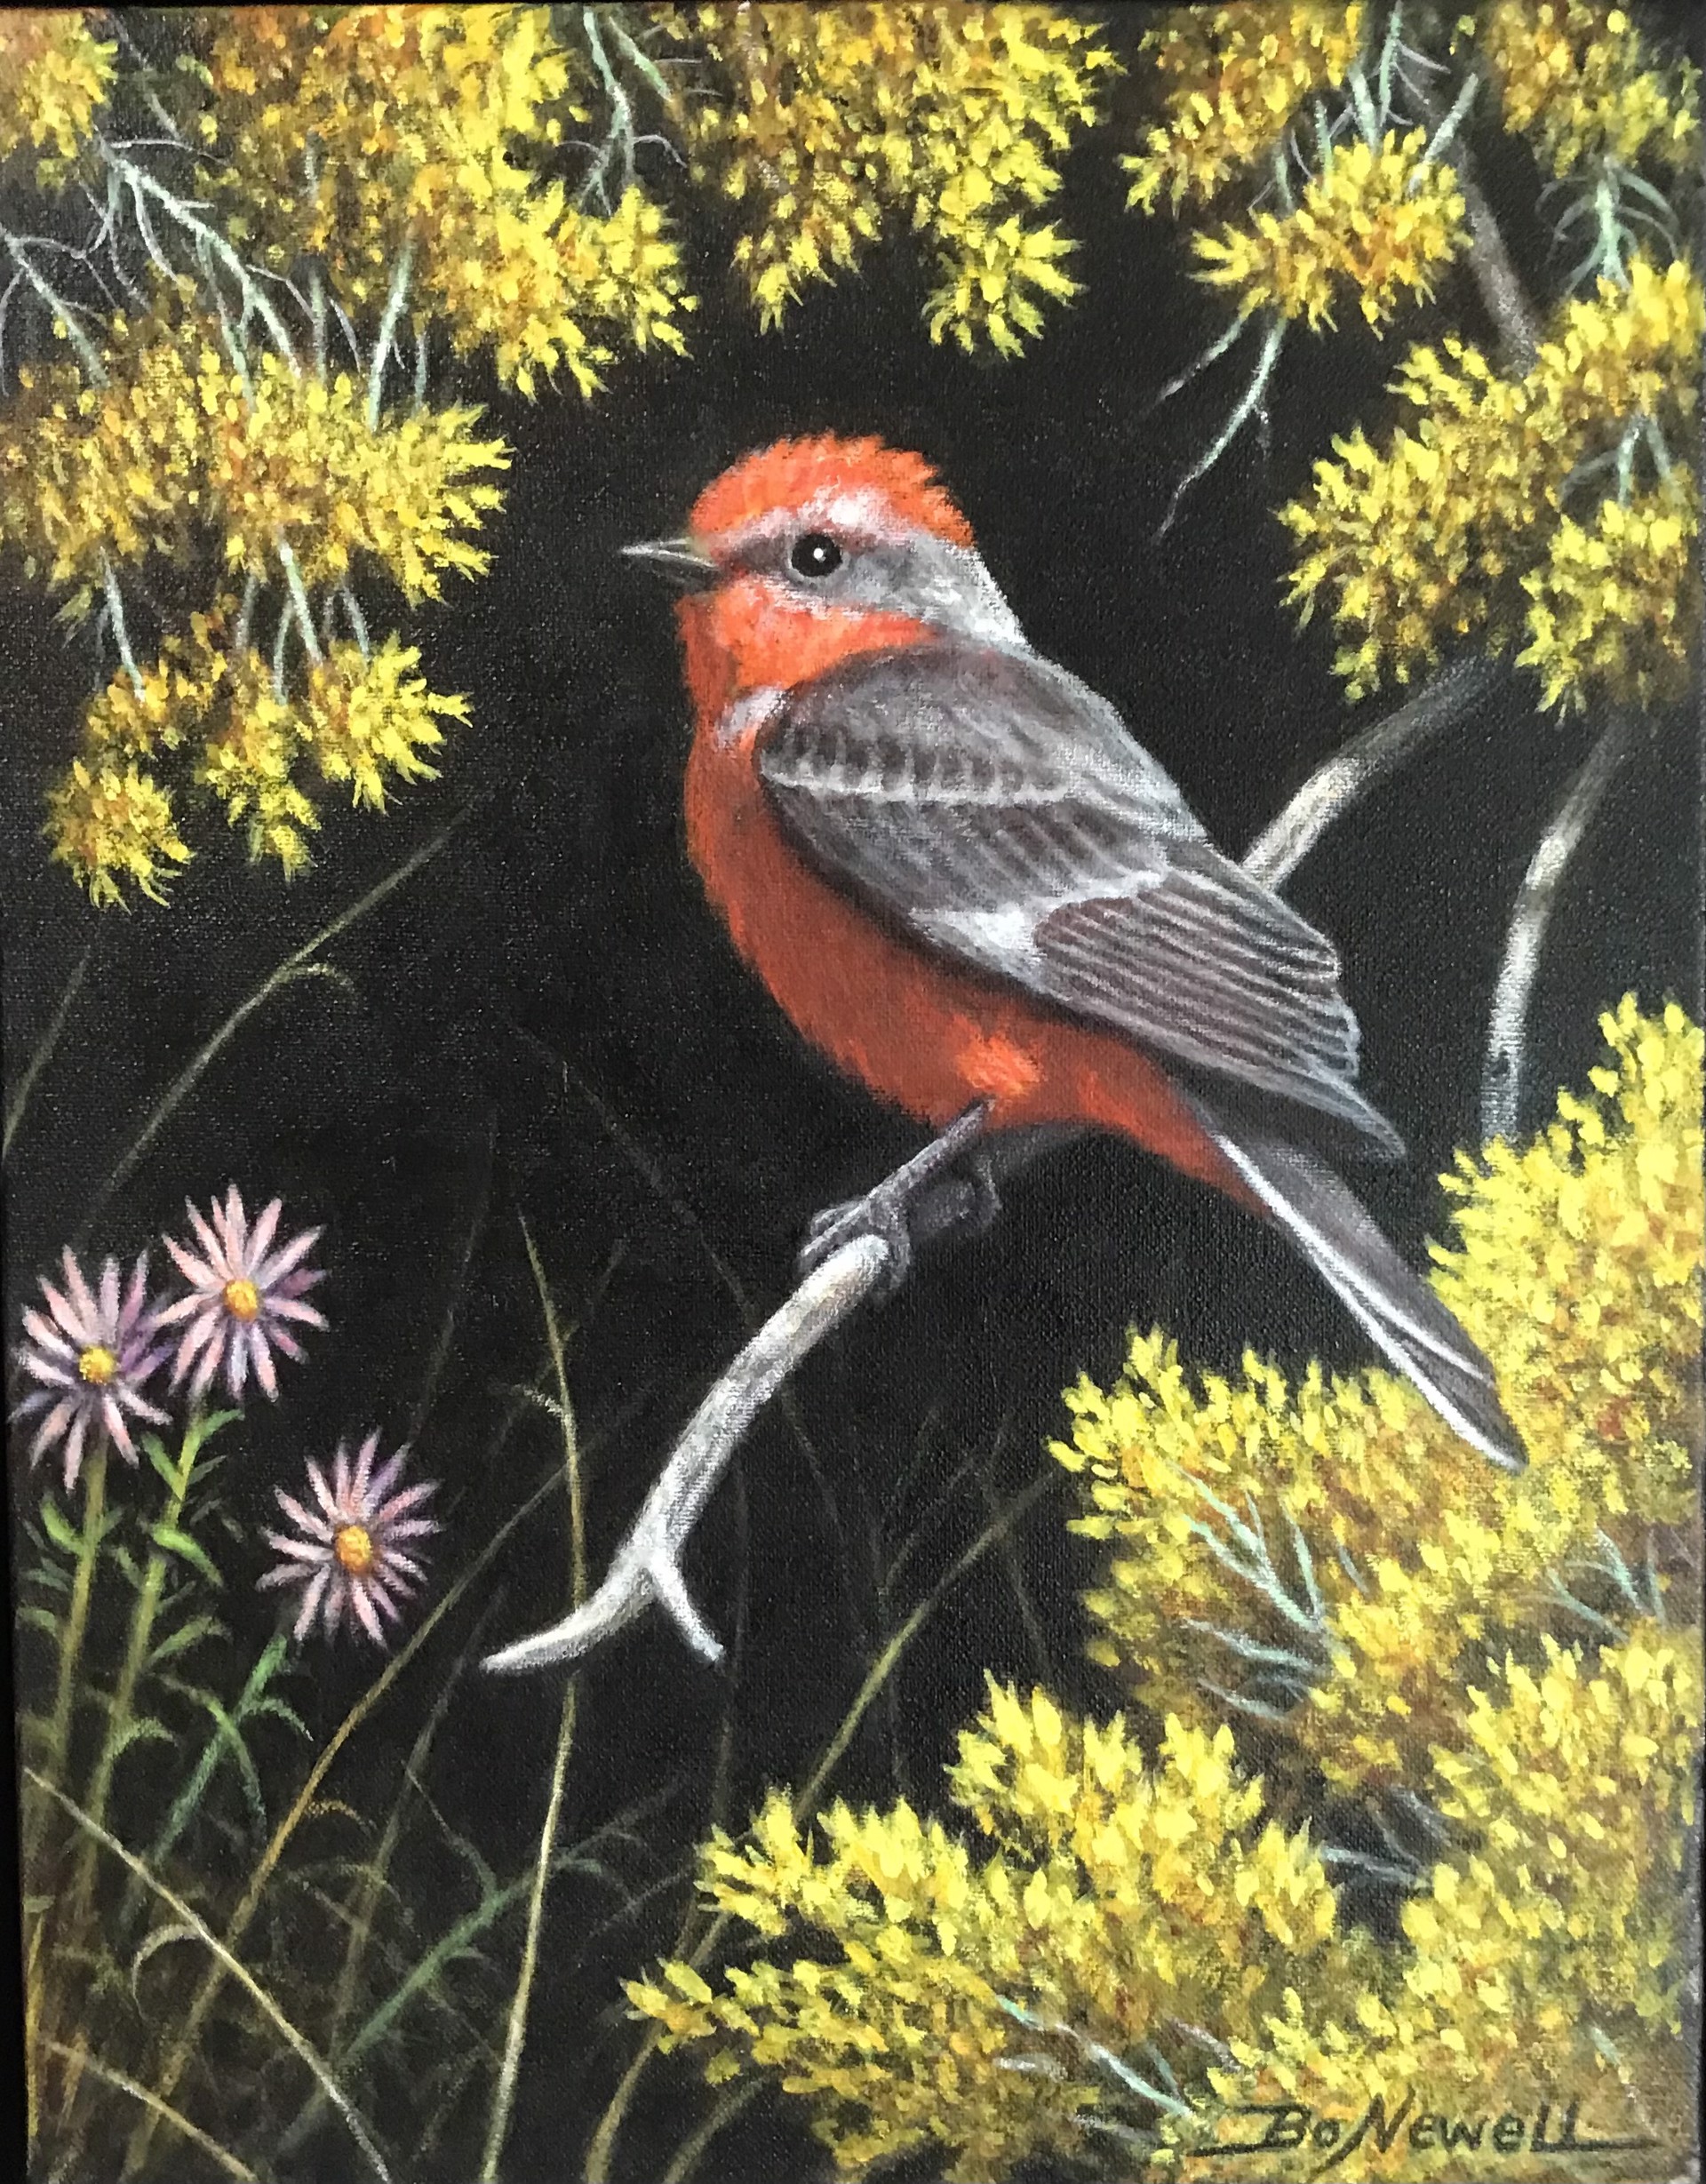 “Redhead” (Vermilion Flycatcher) by Bo Newell